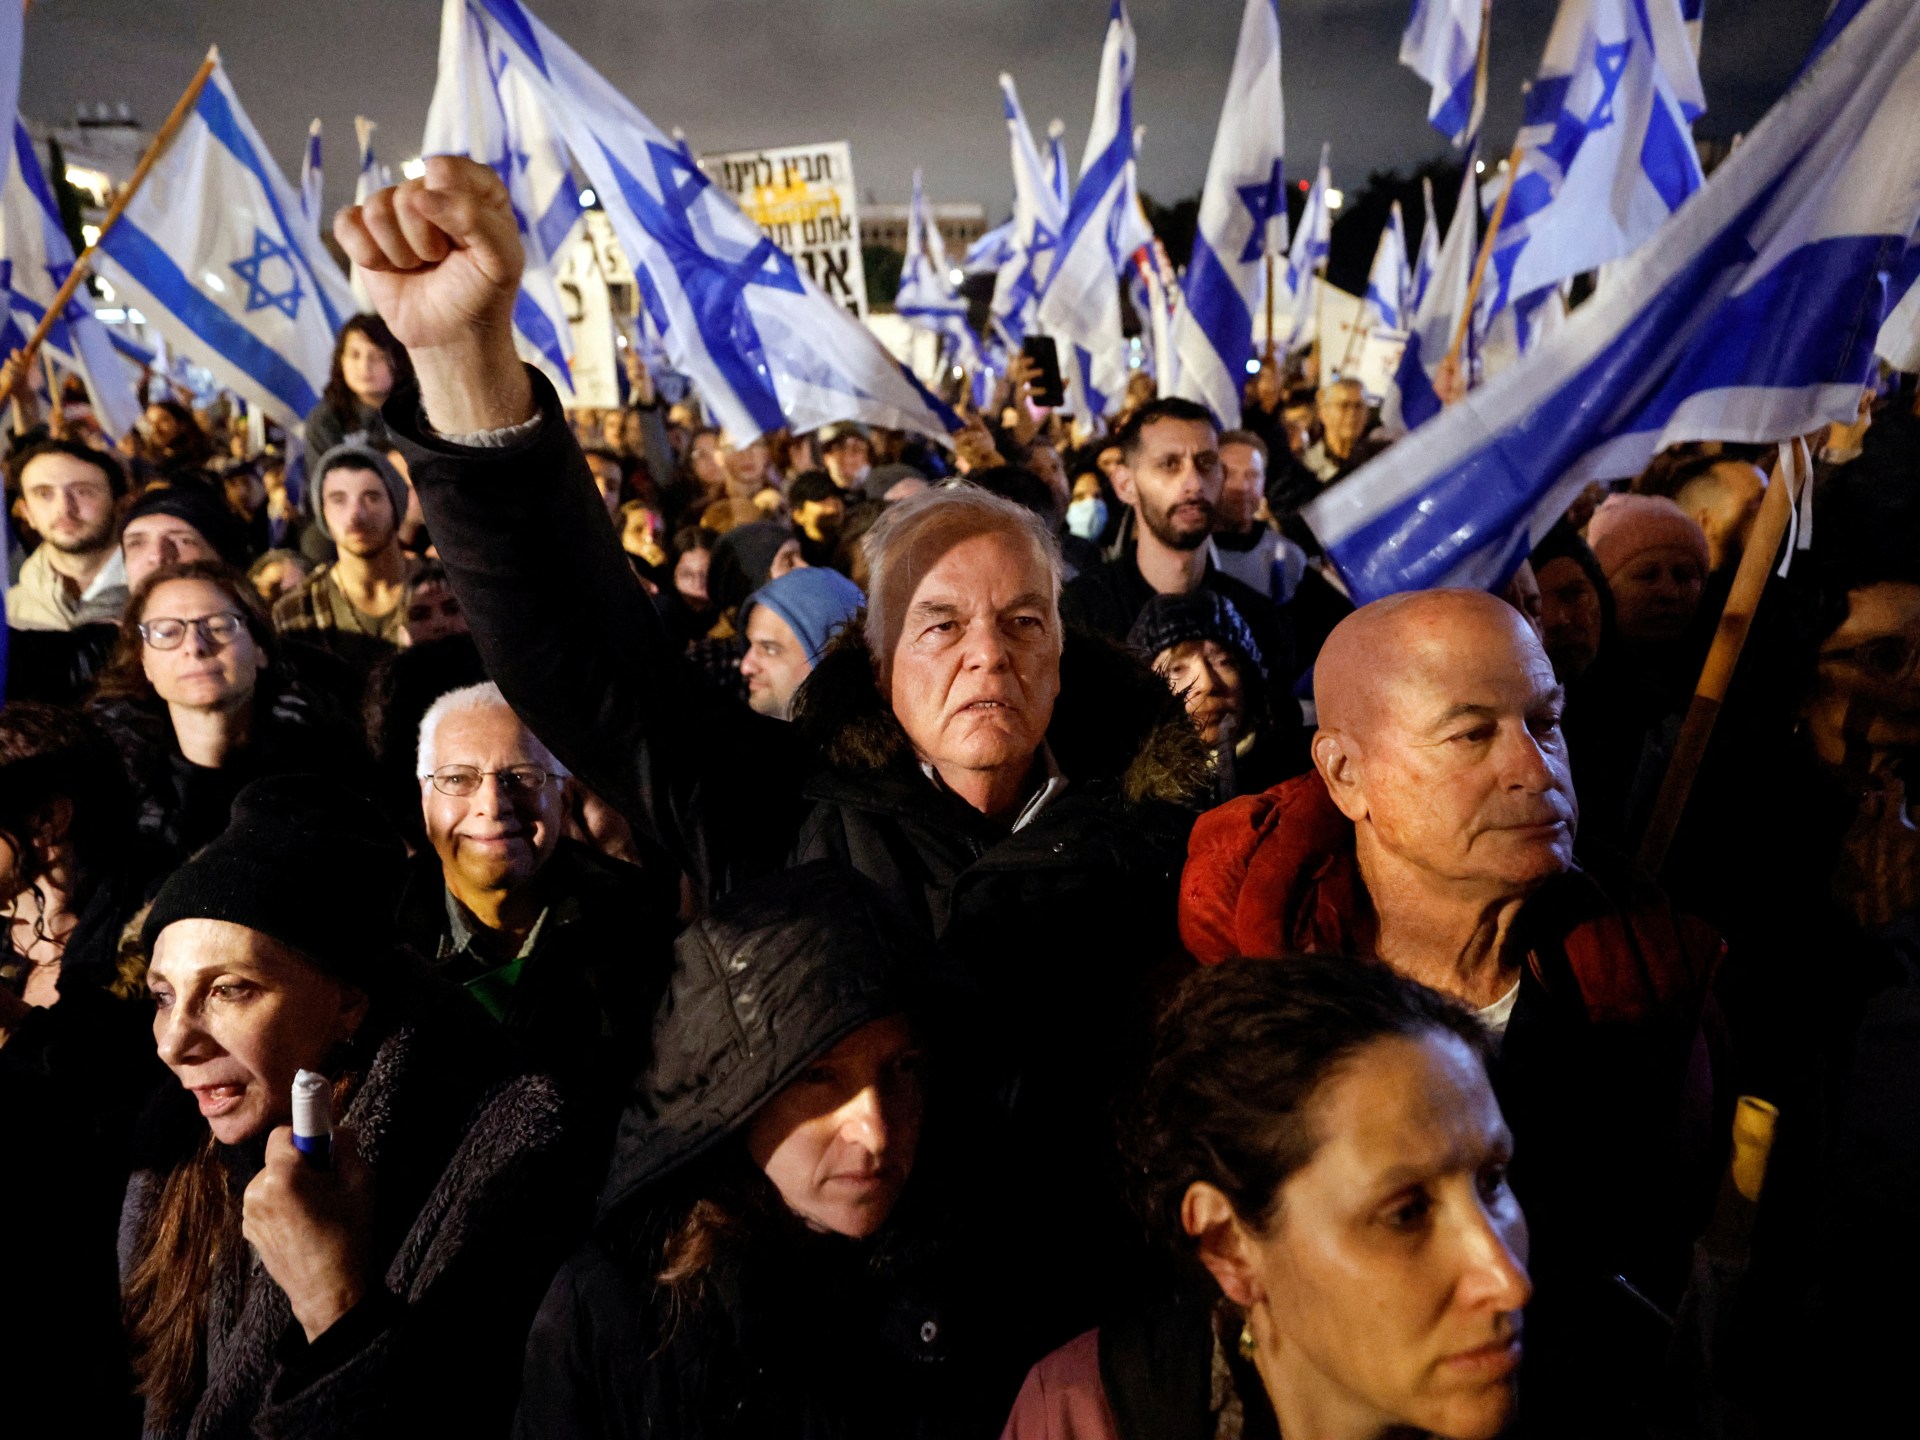 Israelis are not demonstrating for democracy